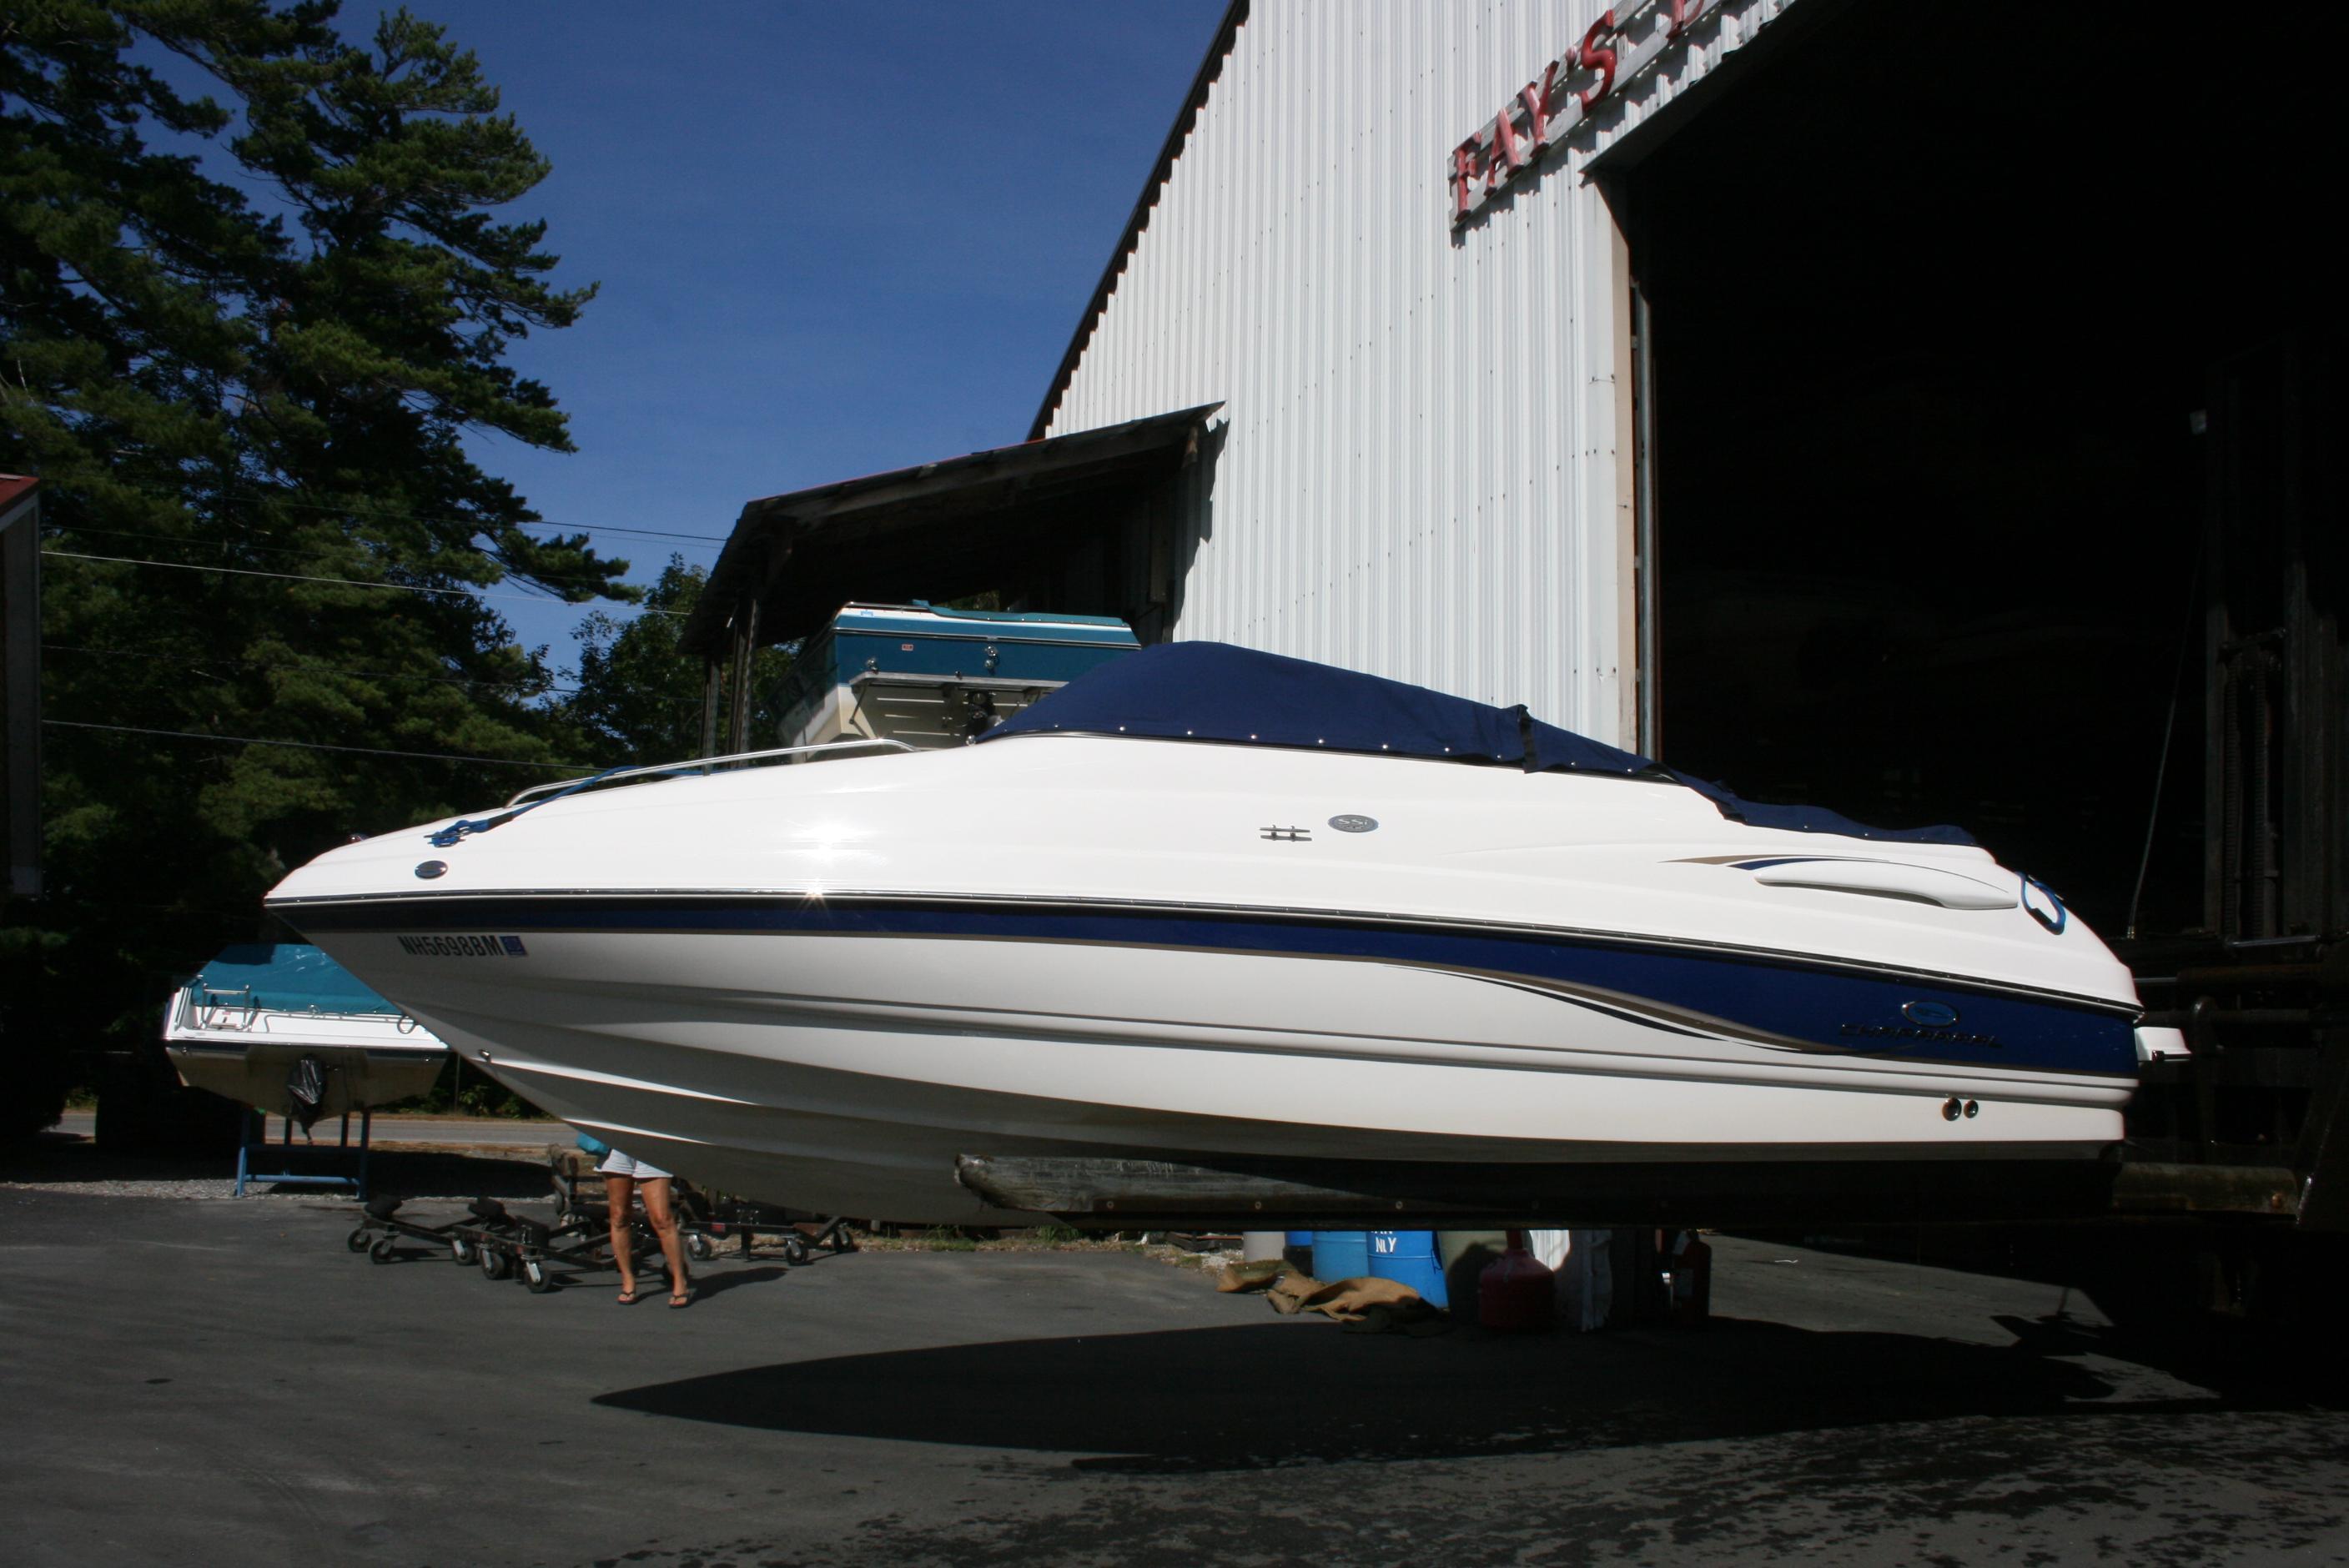 Chaparral 215 SSi, Gilford